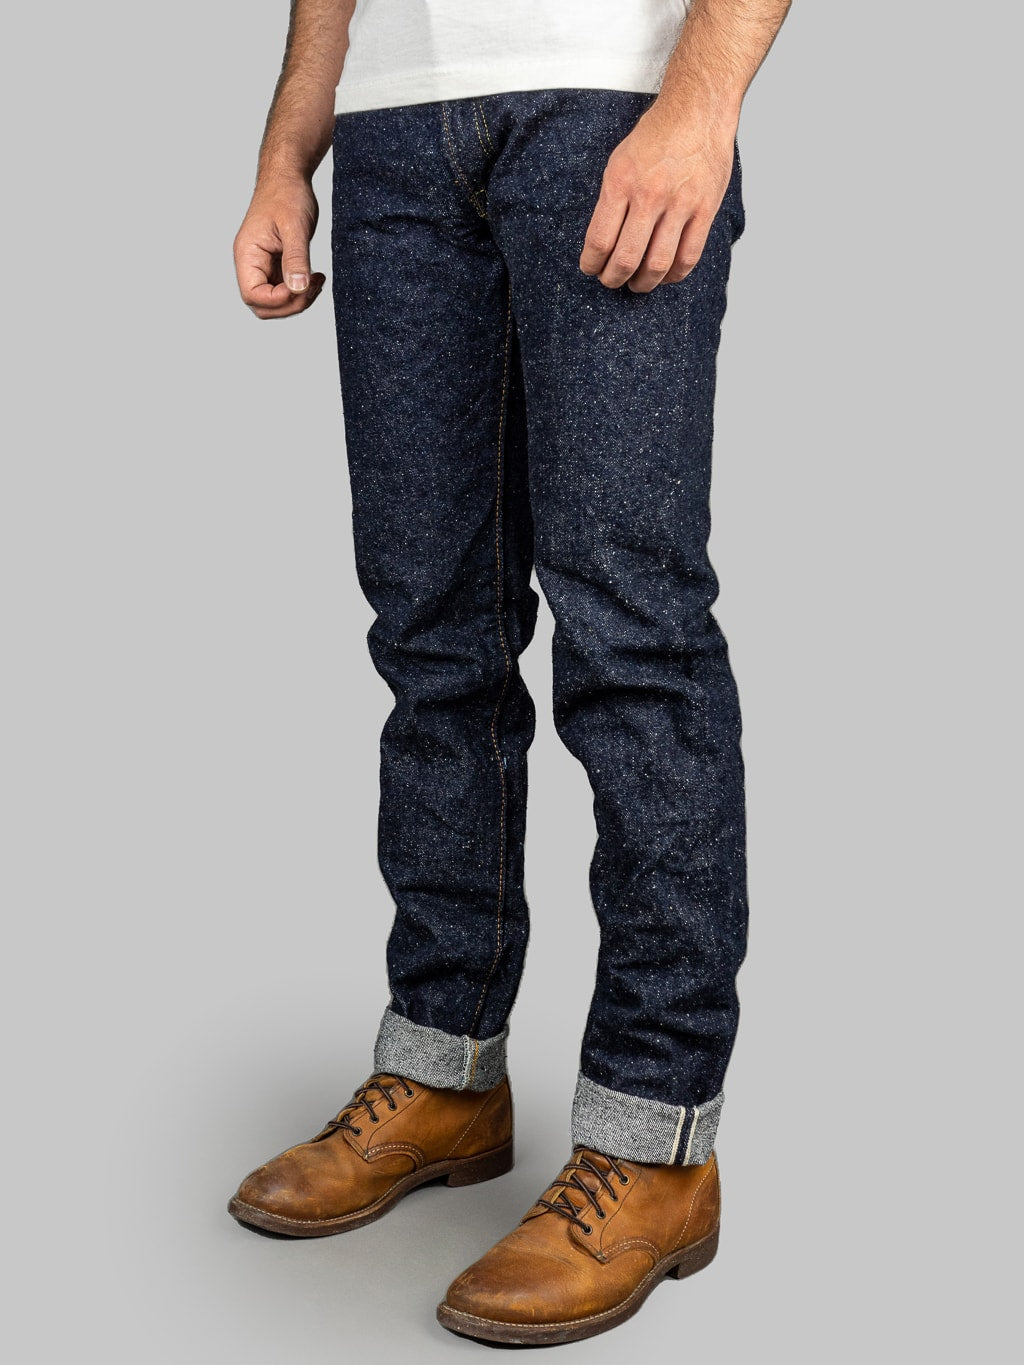 The Strike Gold Keep Earth Natural Indigo Jeans side fit